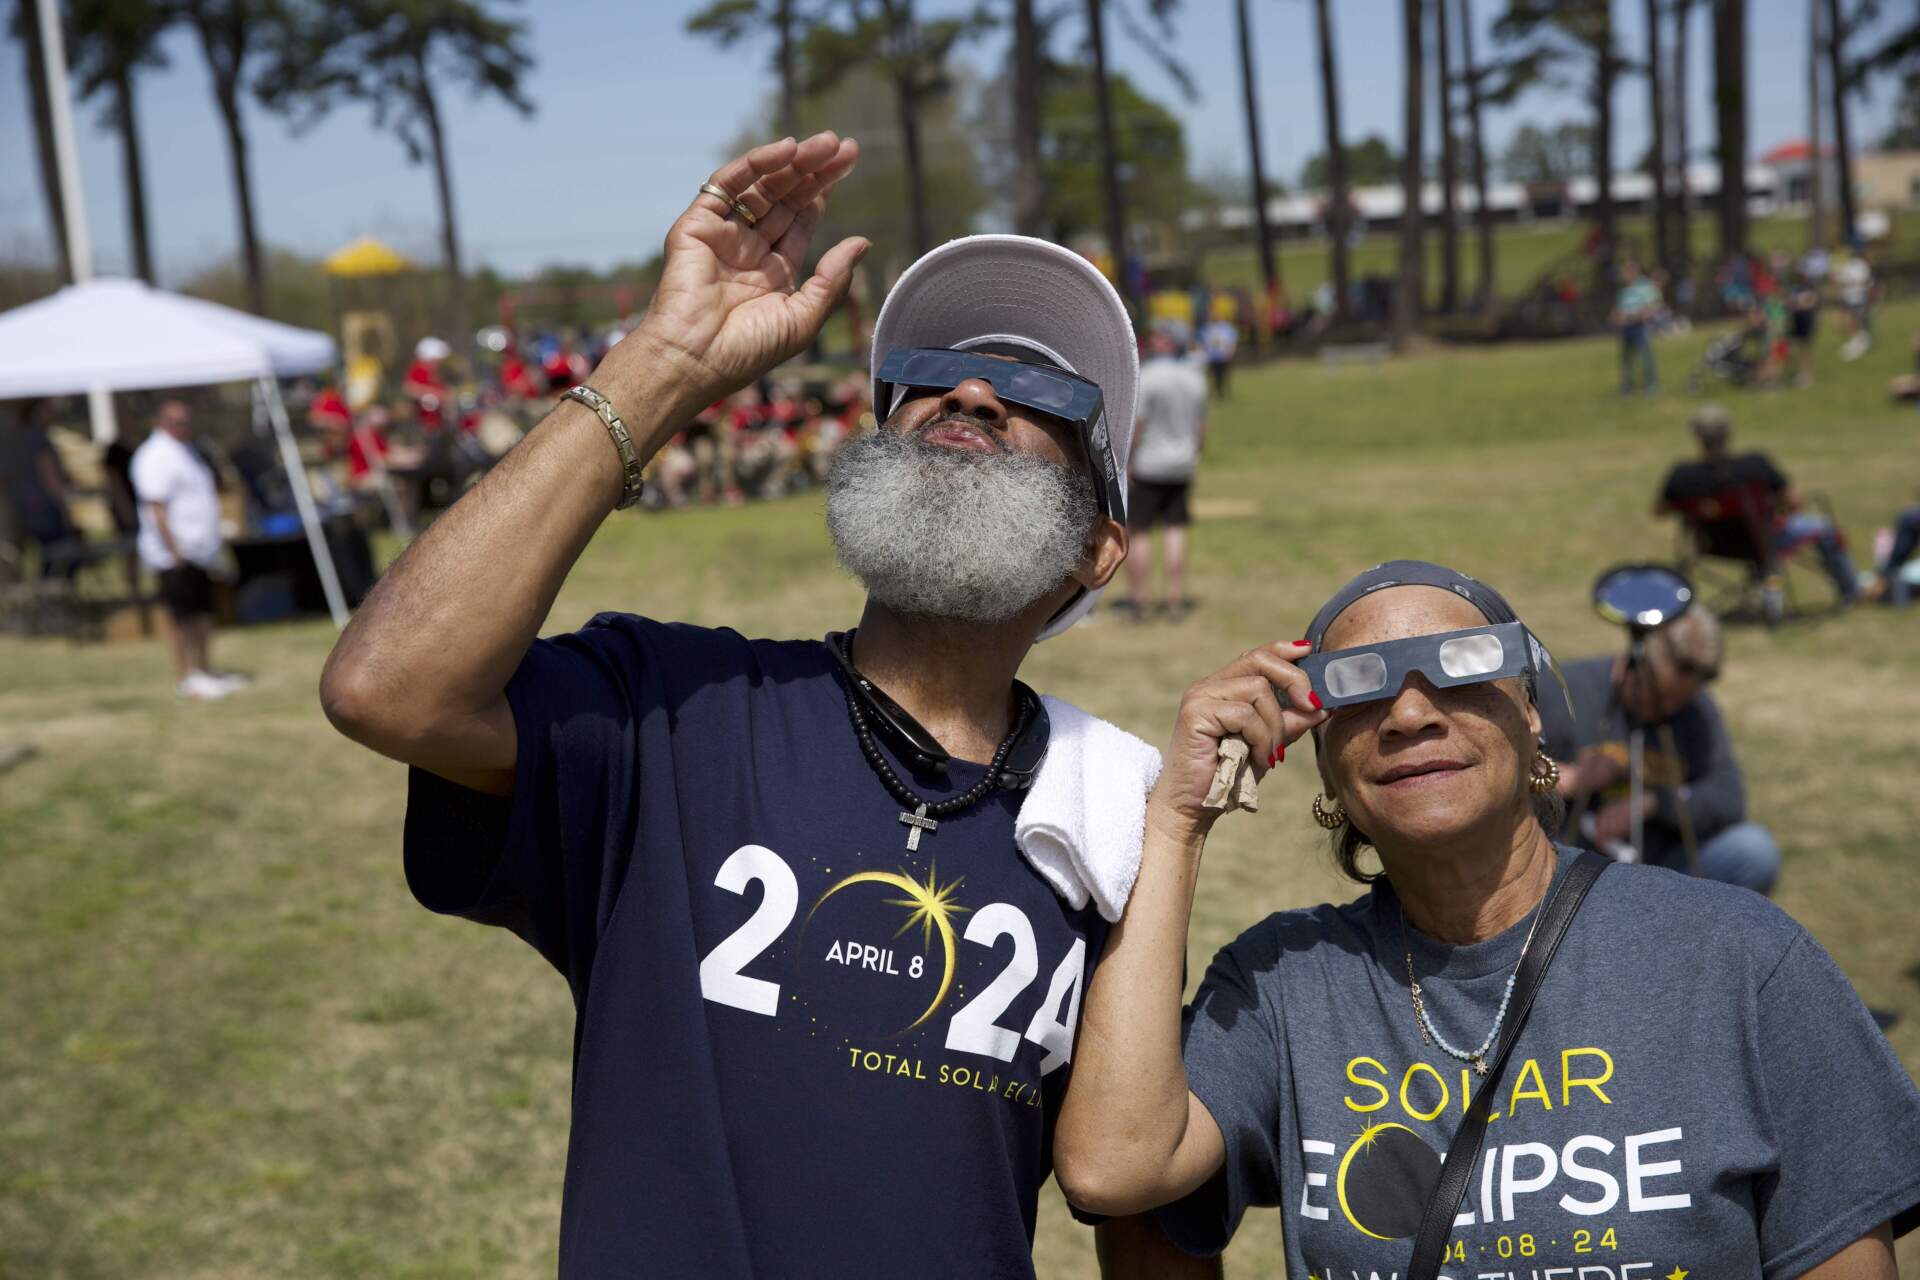 As the eclipse begins, Billy Mills and Bertha Cain look up amidst the festivities at Berryhill Park in Searcy, AR. (Nick Michael/NPR)